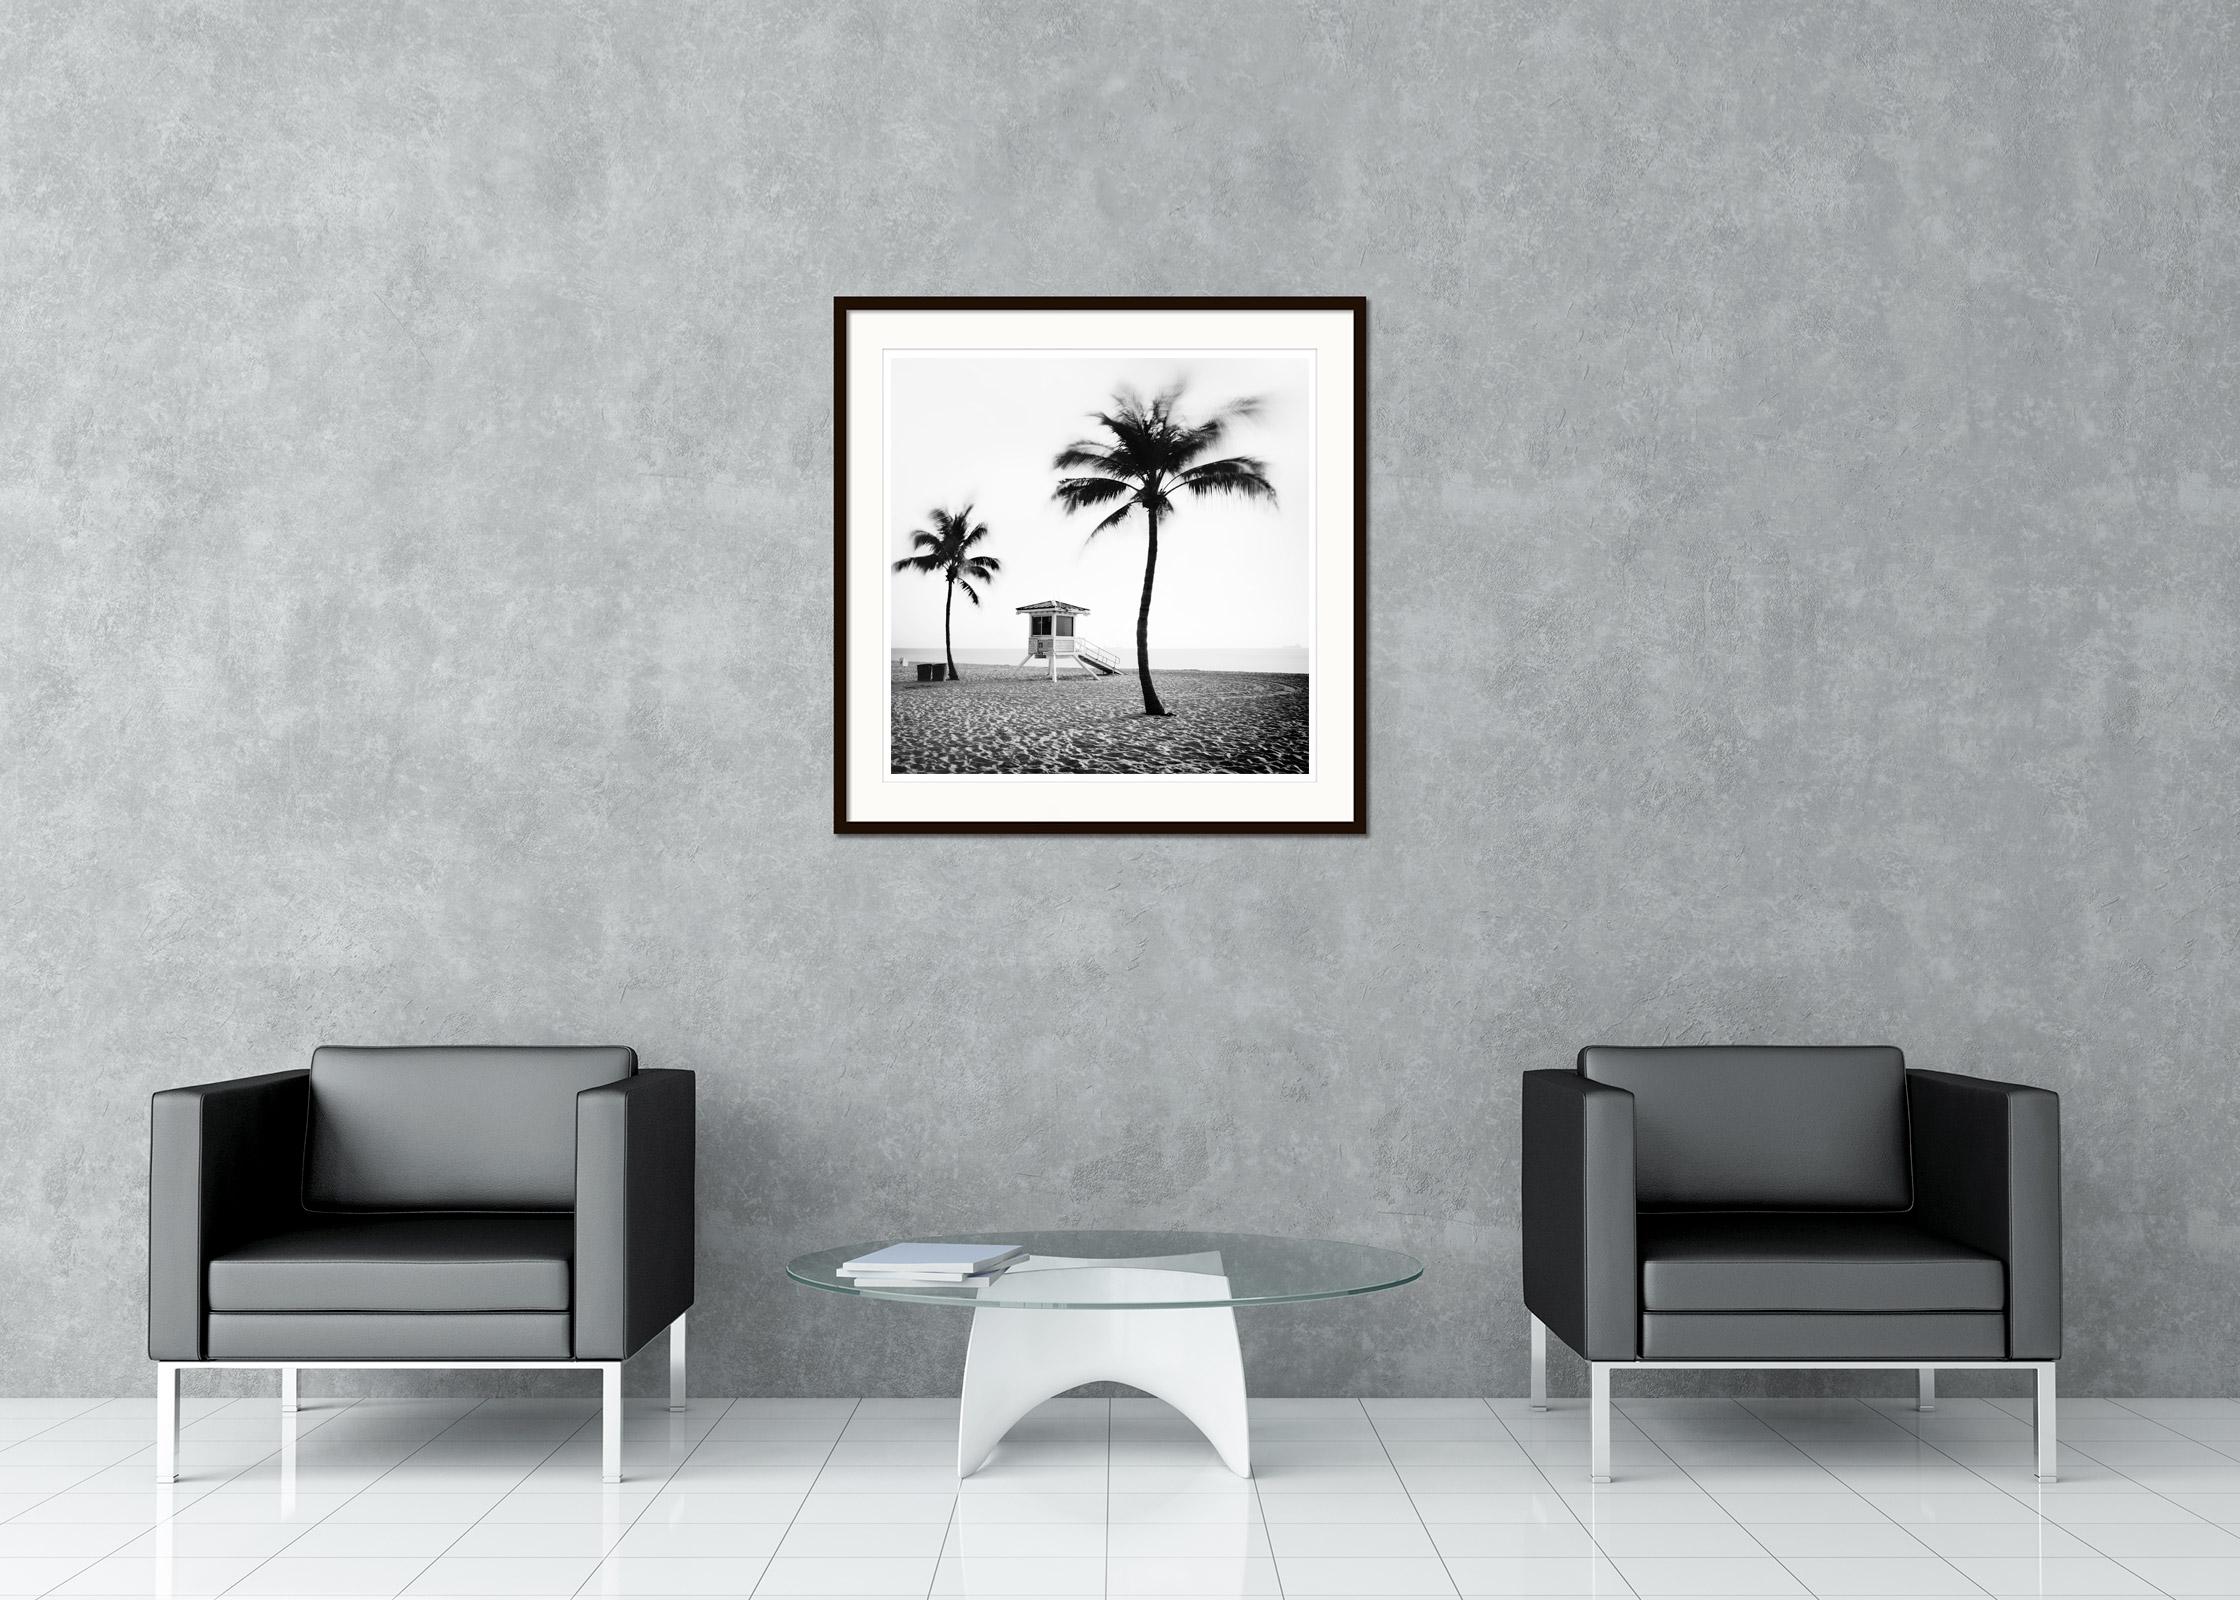 Fort Lauderdale Beach, Florida - Black and White Fine Art Landscape Photography - Gray Black and White Photograph by Gerald Berghammer